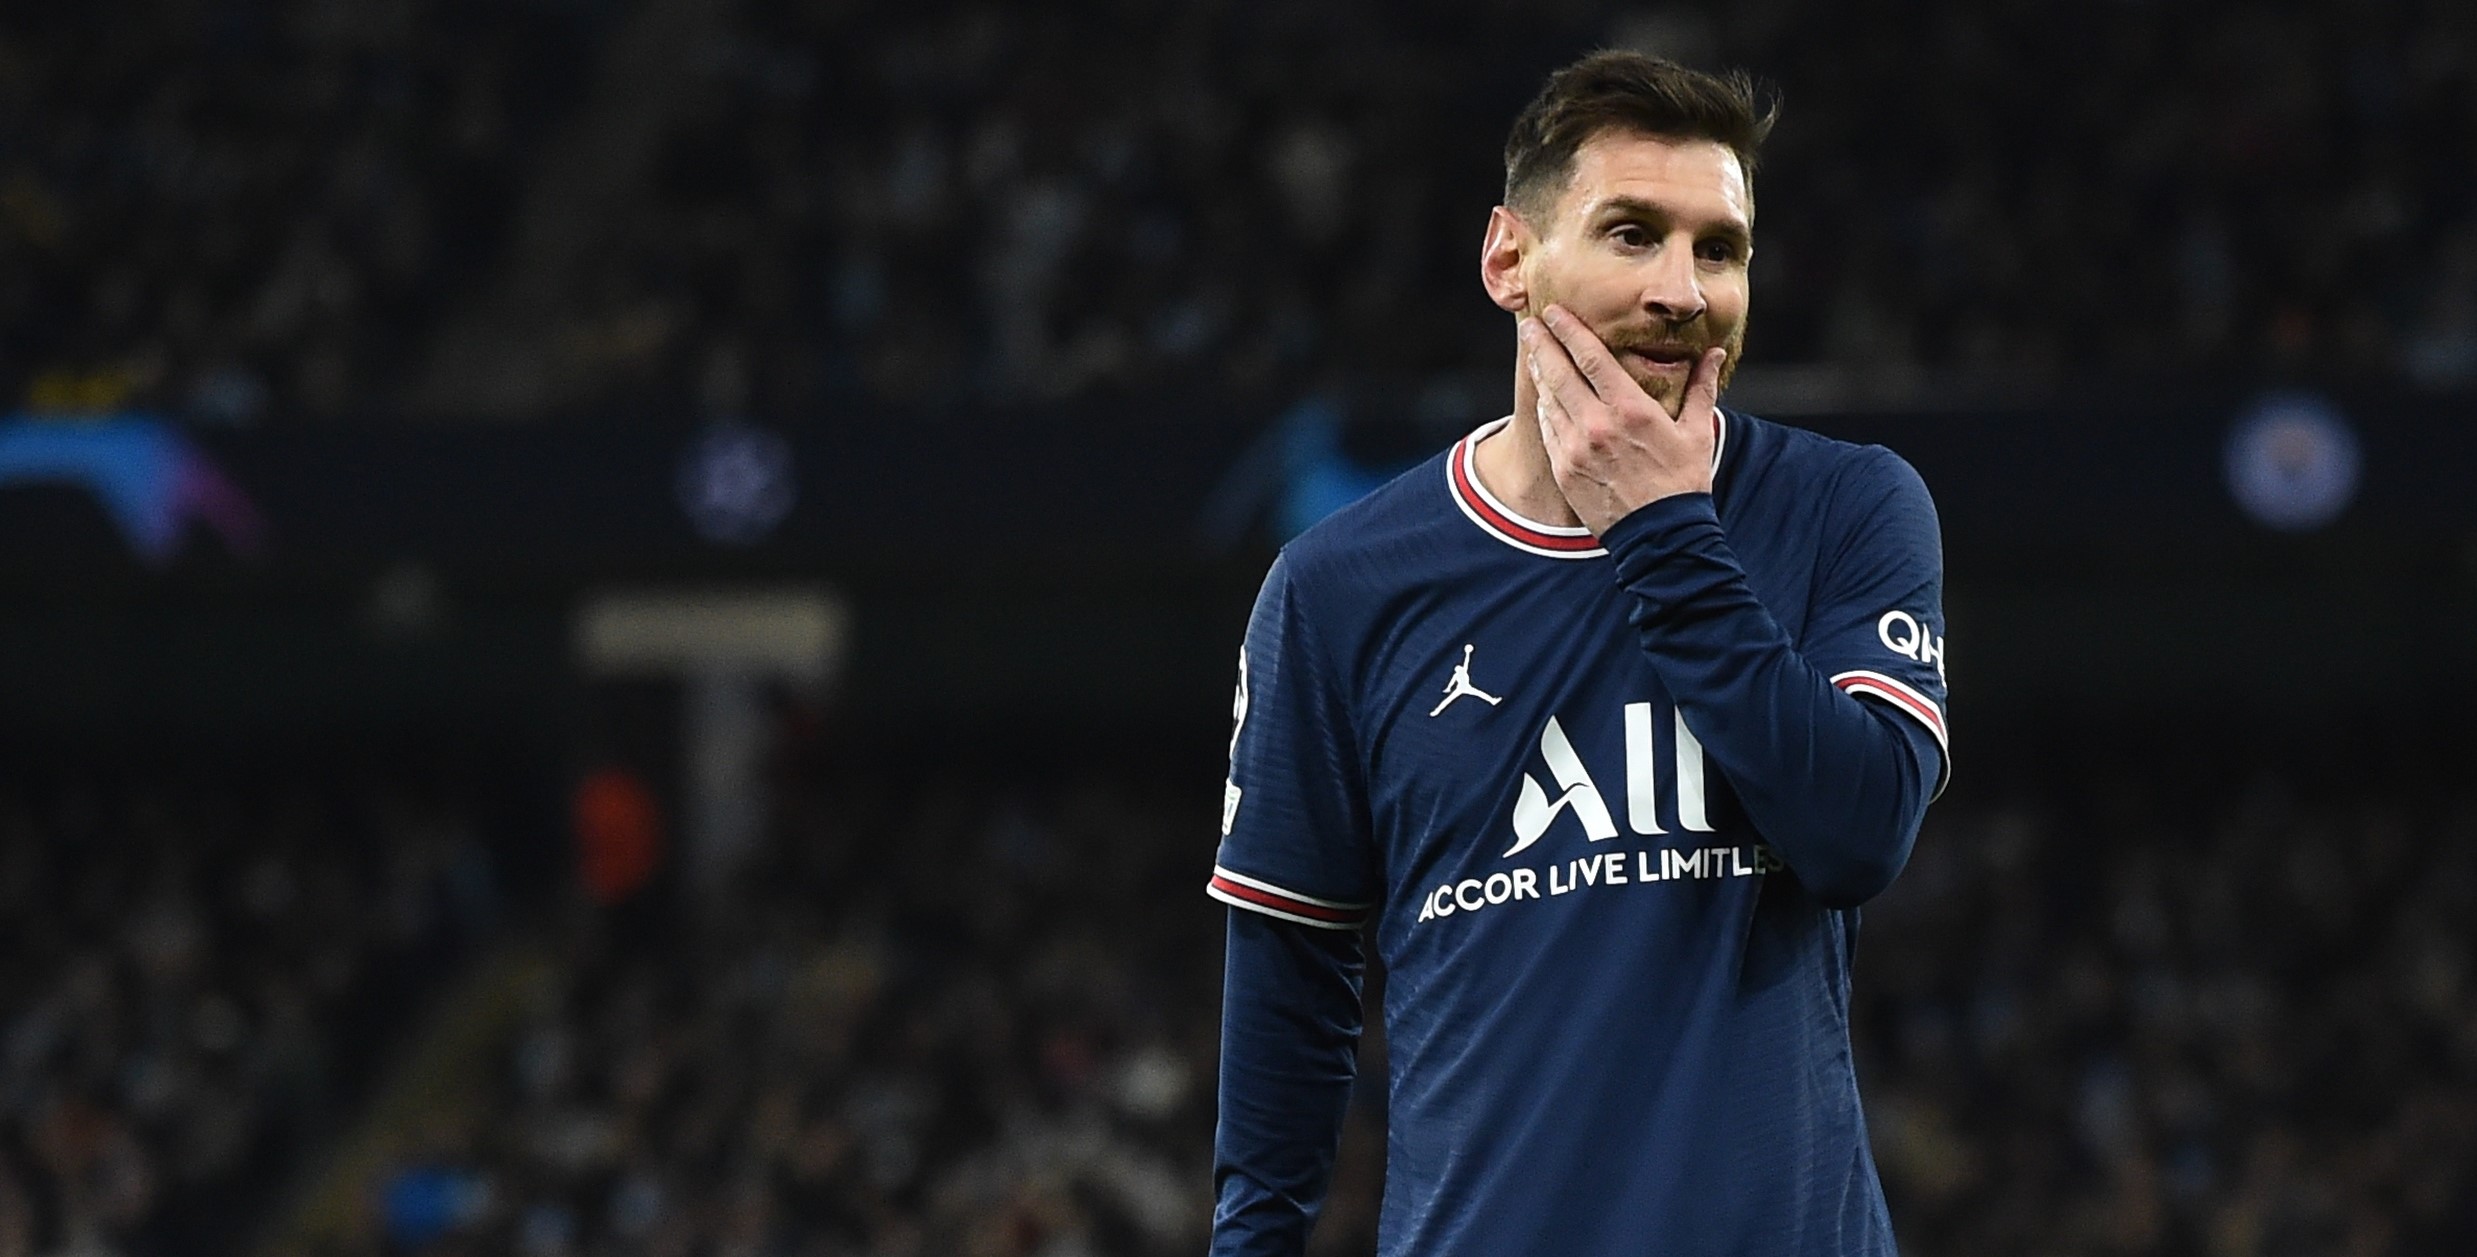 epa09601471 Paris Saint-Germain's Lionel Messi reacts during the UEFA Champions League group A soccer match between Manchester City and Paris Saint-Germain (PSG) in Manchester, Britain, 24 November 2021.  EPA/Peter Powell